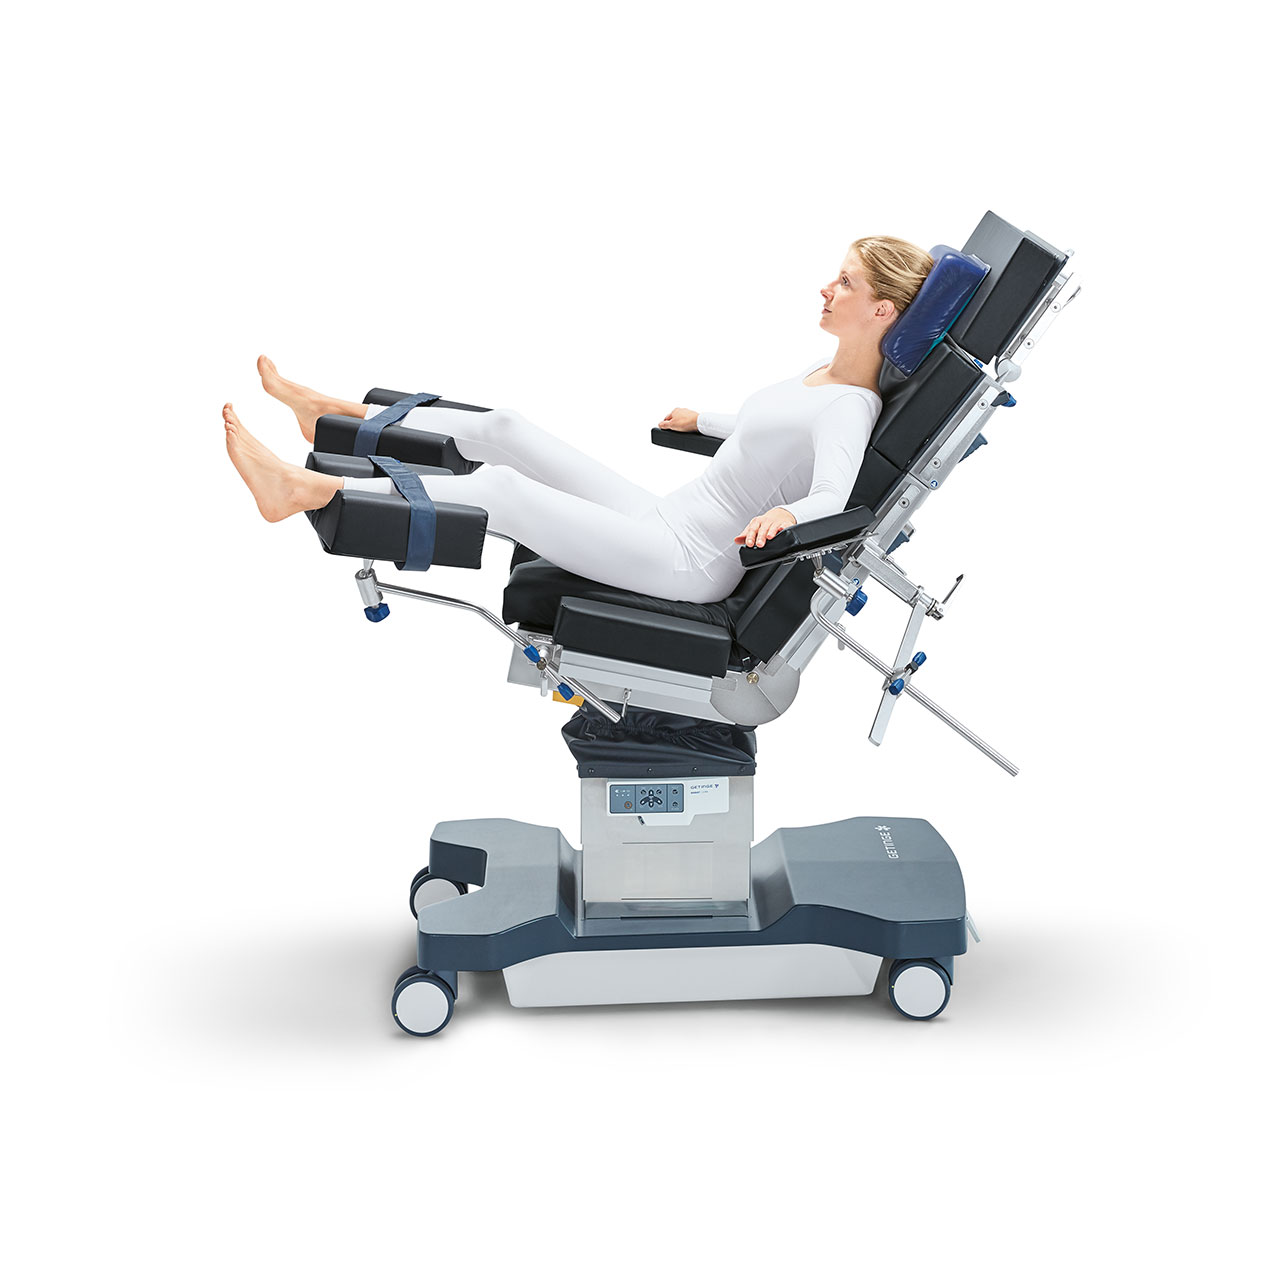 The Maquet Lyra Mobile OR Table ensures stability and safety for a broad range of patients. It has a maximum load of 360 kg in normal position, and 180 kg without any restrictions – ideal for  most patient populations.